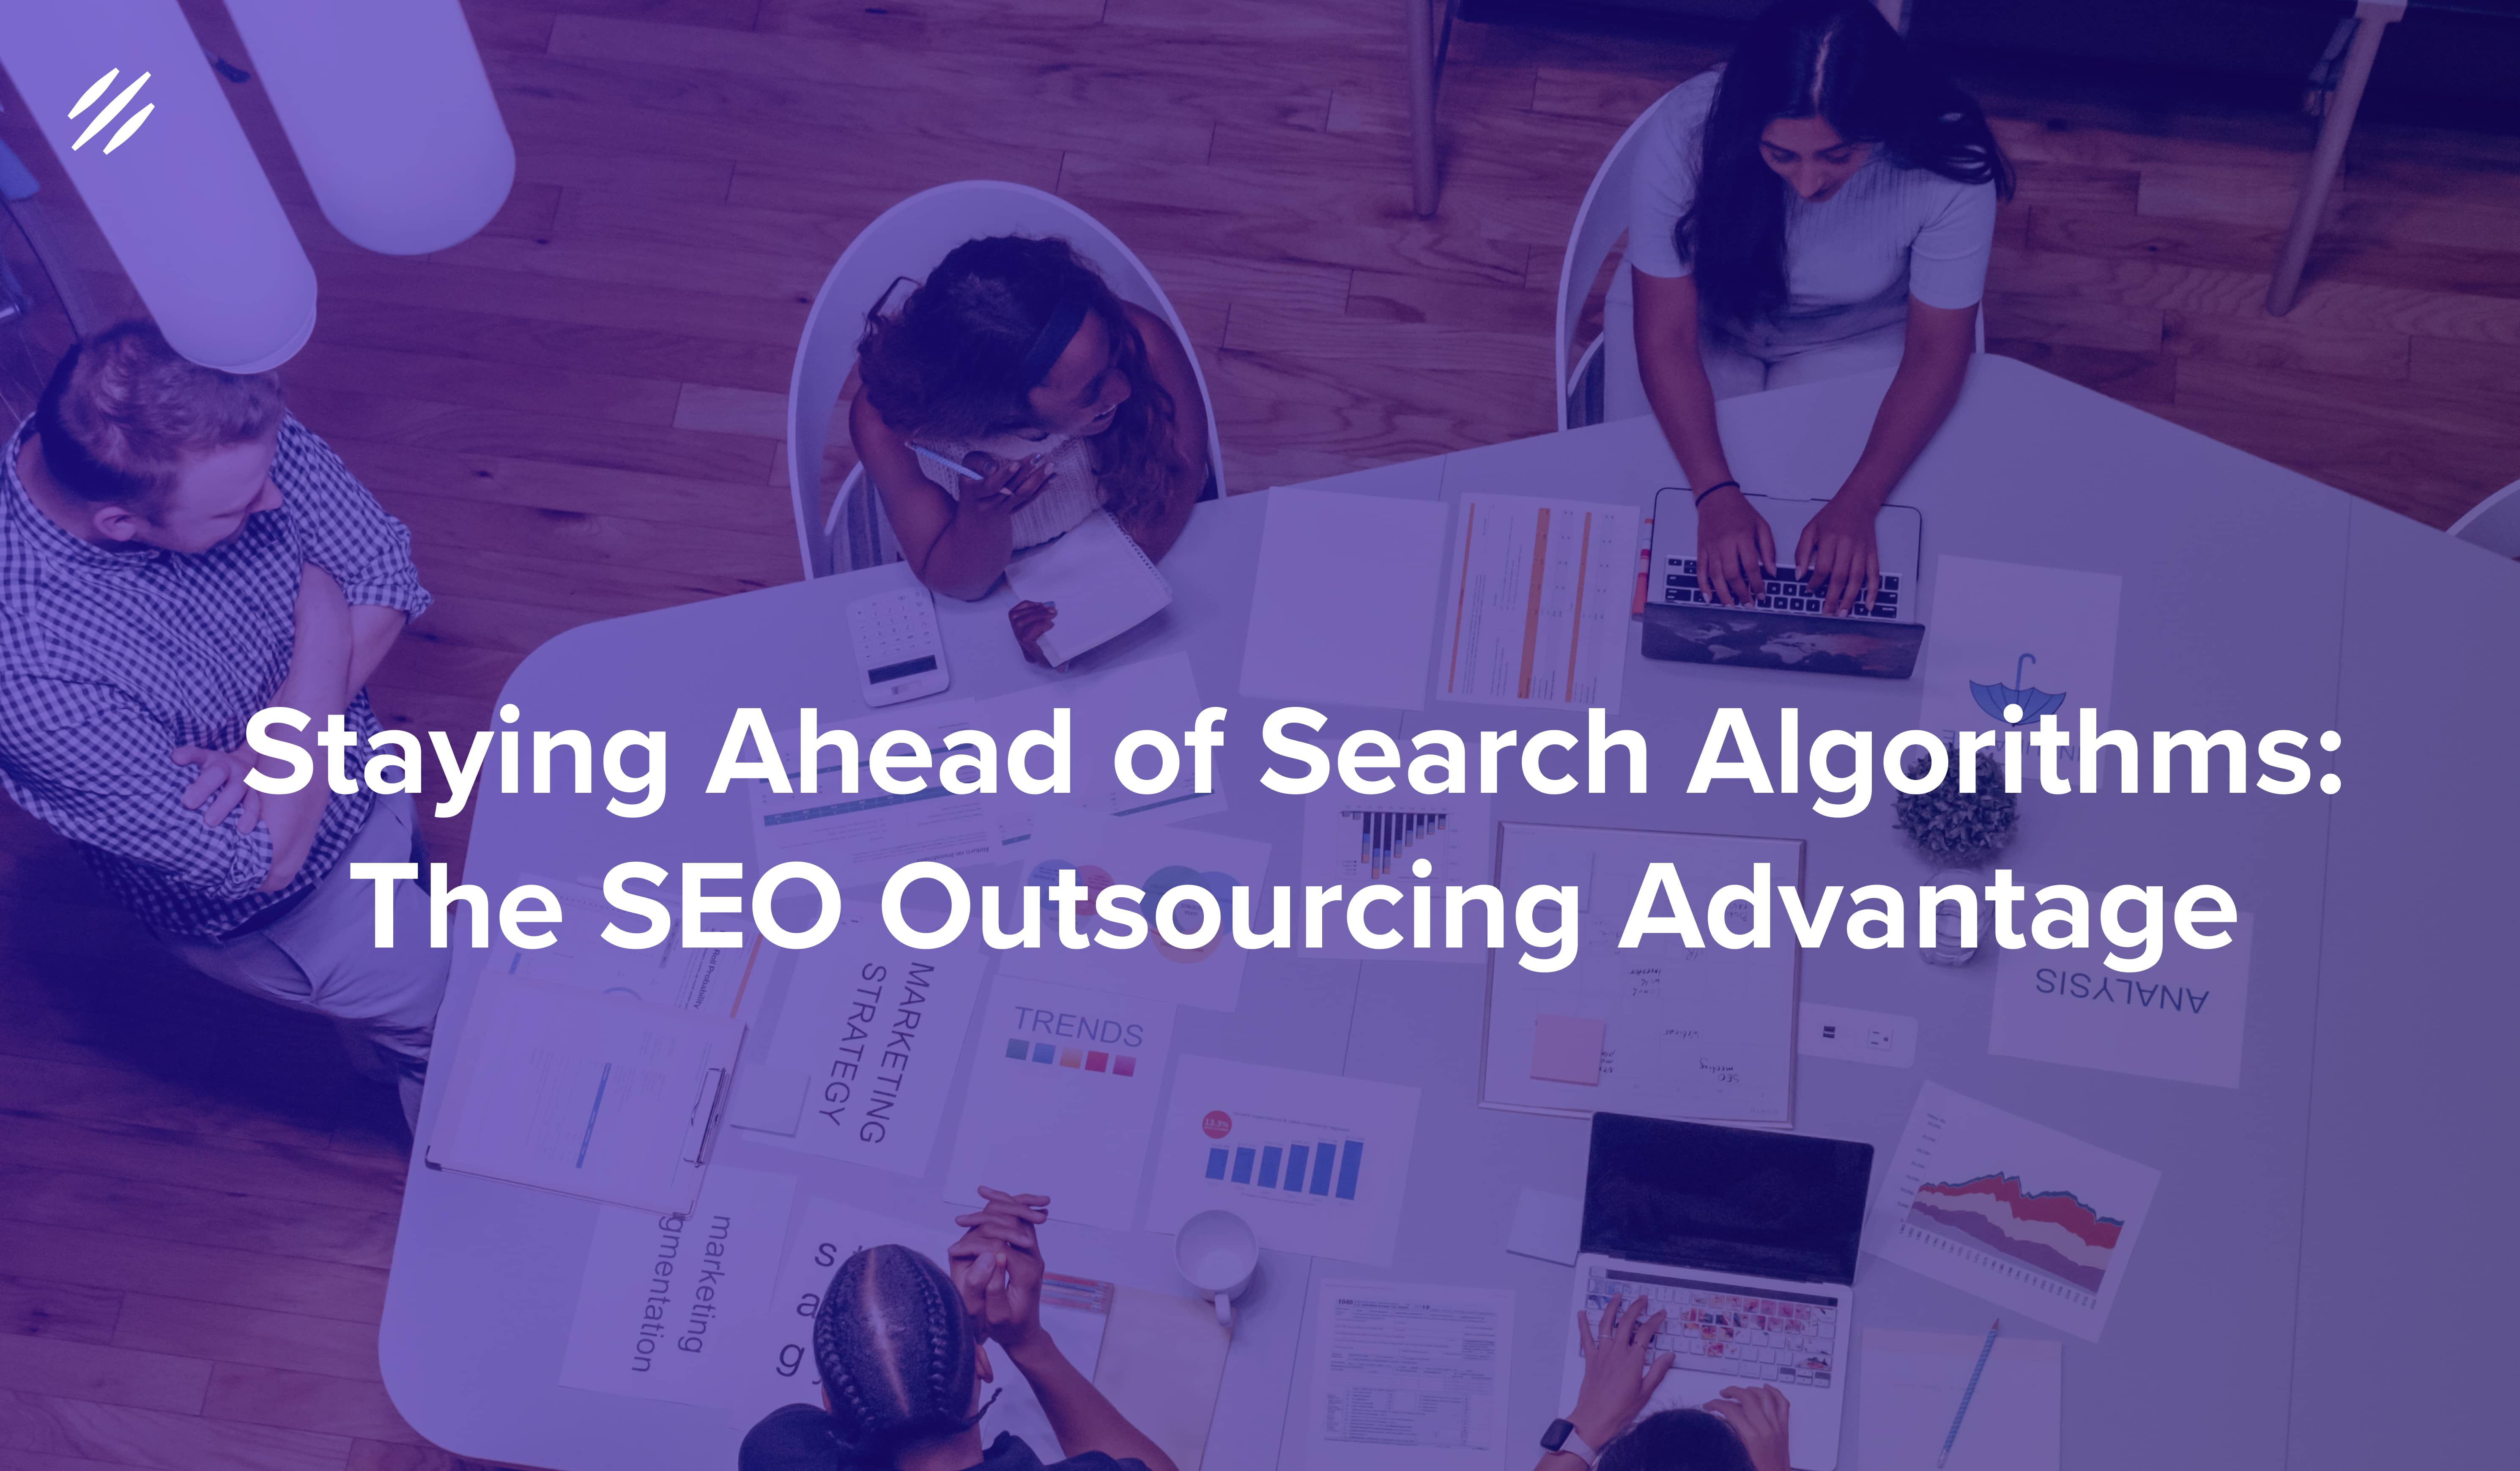 Staying Ahead of Search Algorithms: The SEO Outsourcing Advantage